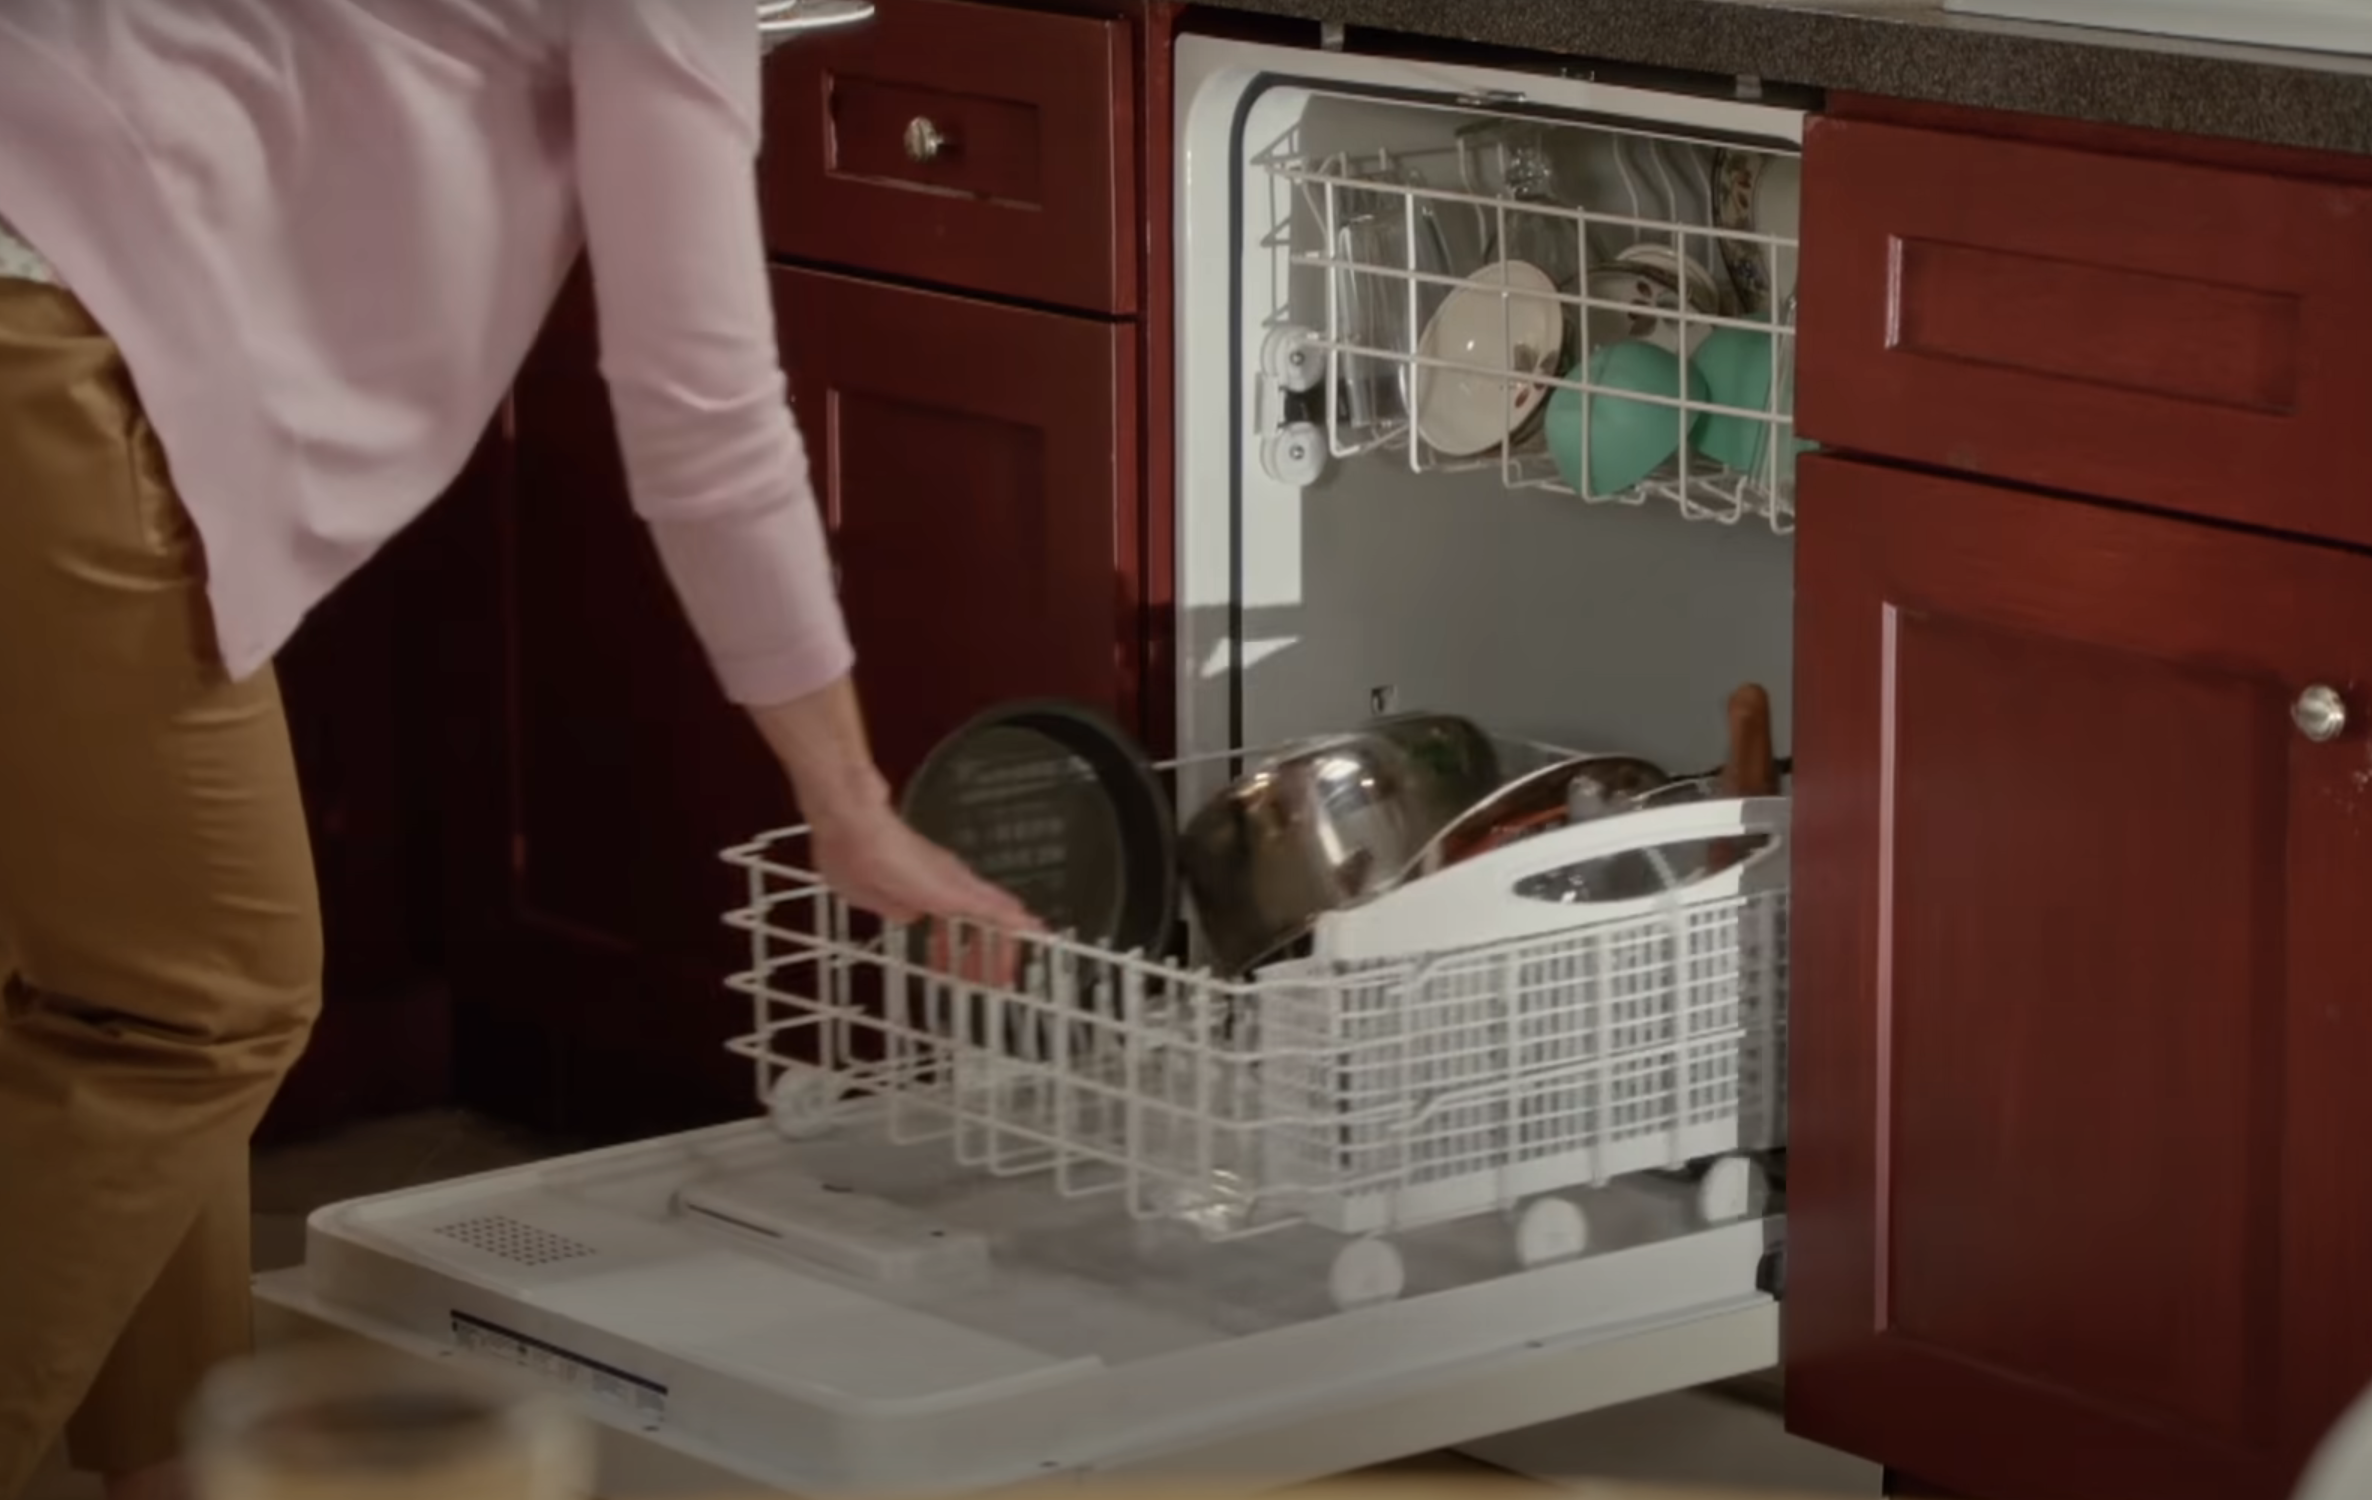 A person loading a dishwasher